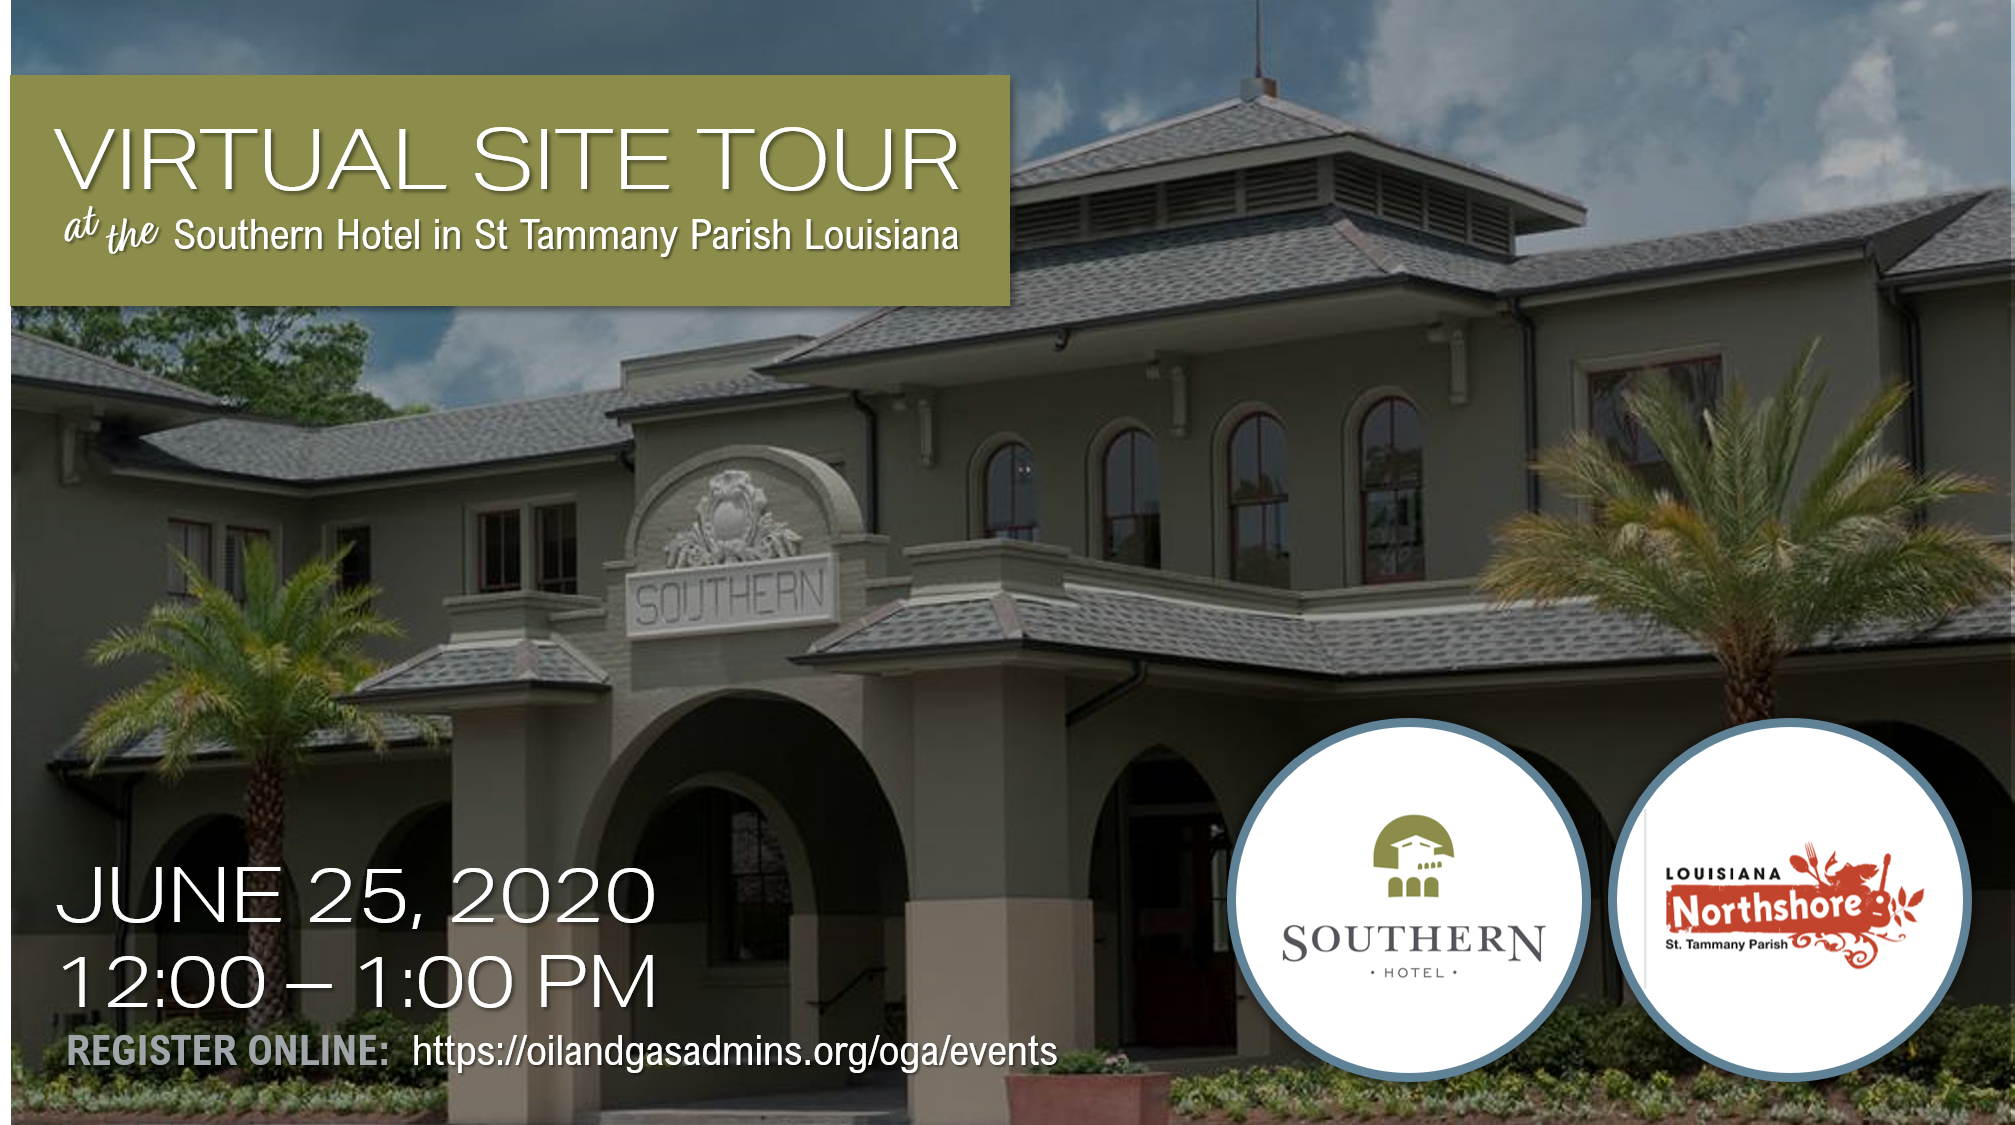 Virtual Site Tour at the Southern Hotel in St Tammany Parish Louisiana